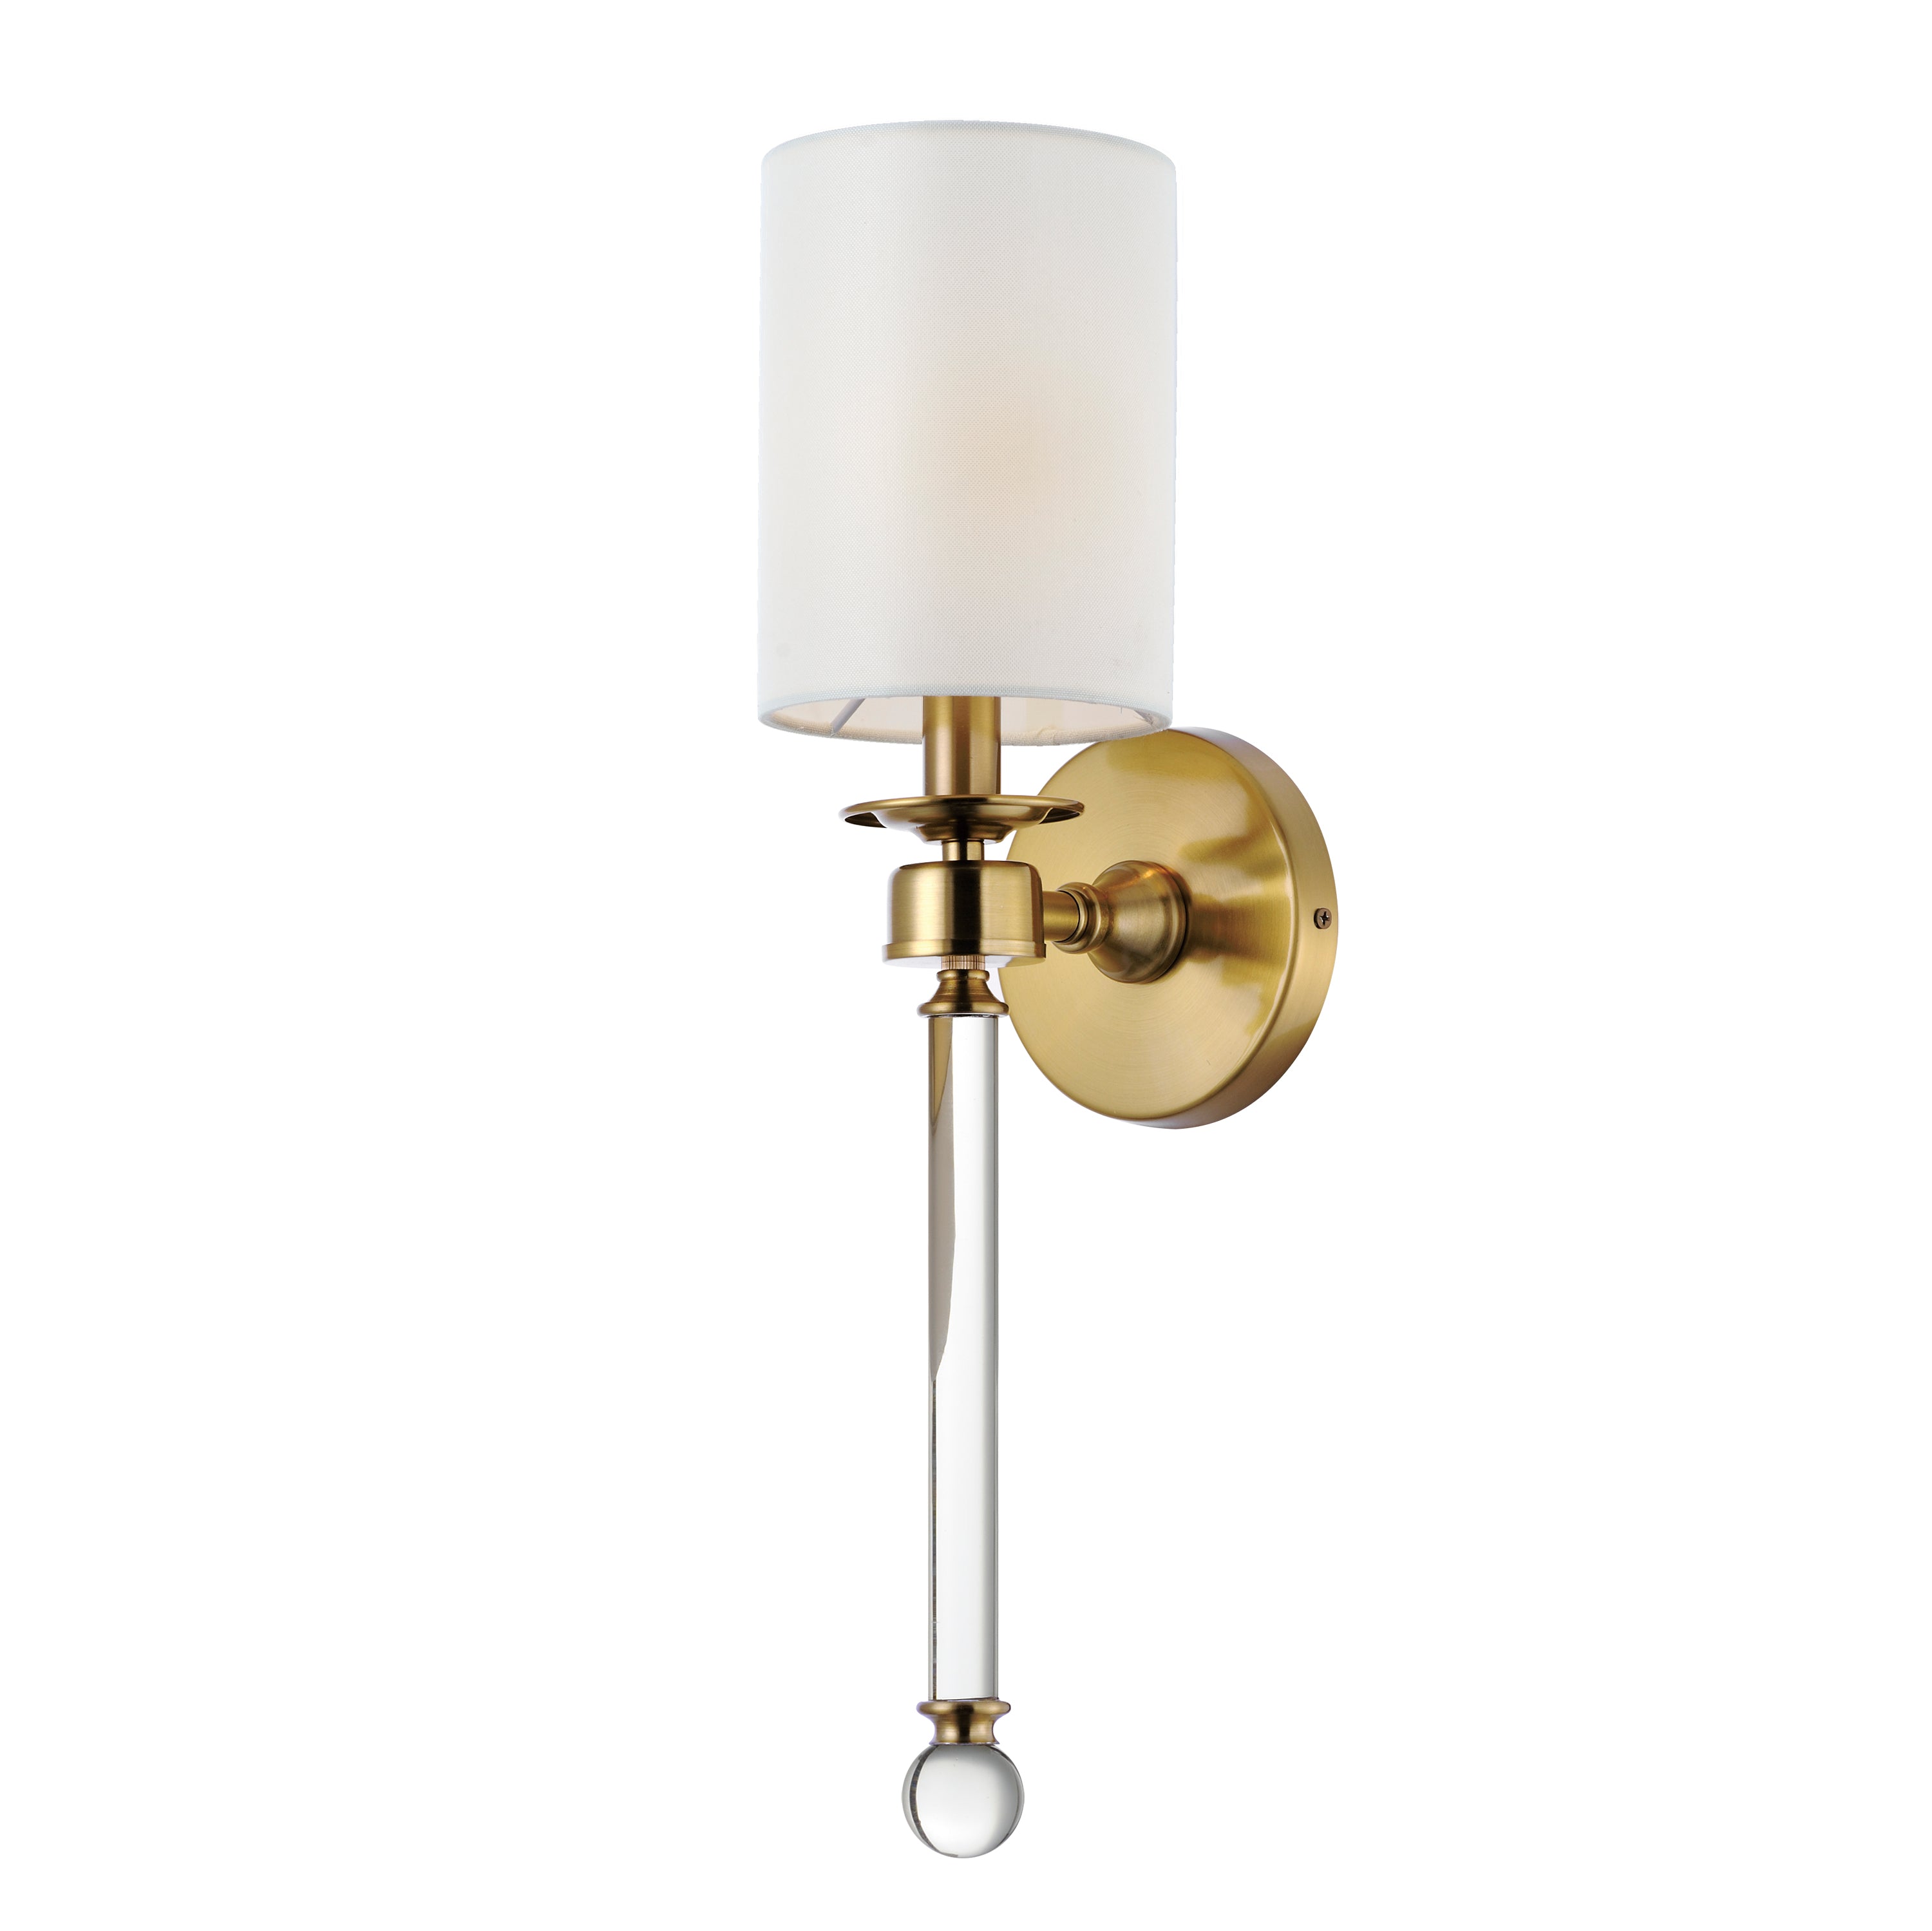 Maxim Lucent-Wall Sconce Wall Light Fixtures Maxim Heritage Clear 5x21